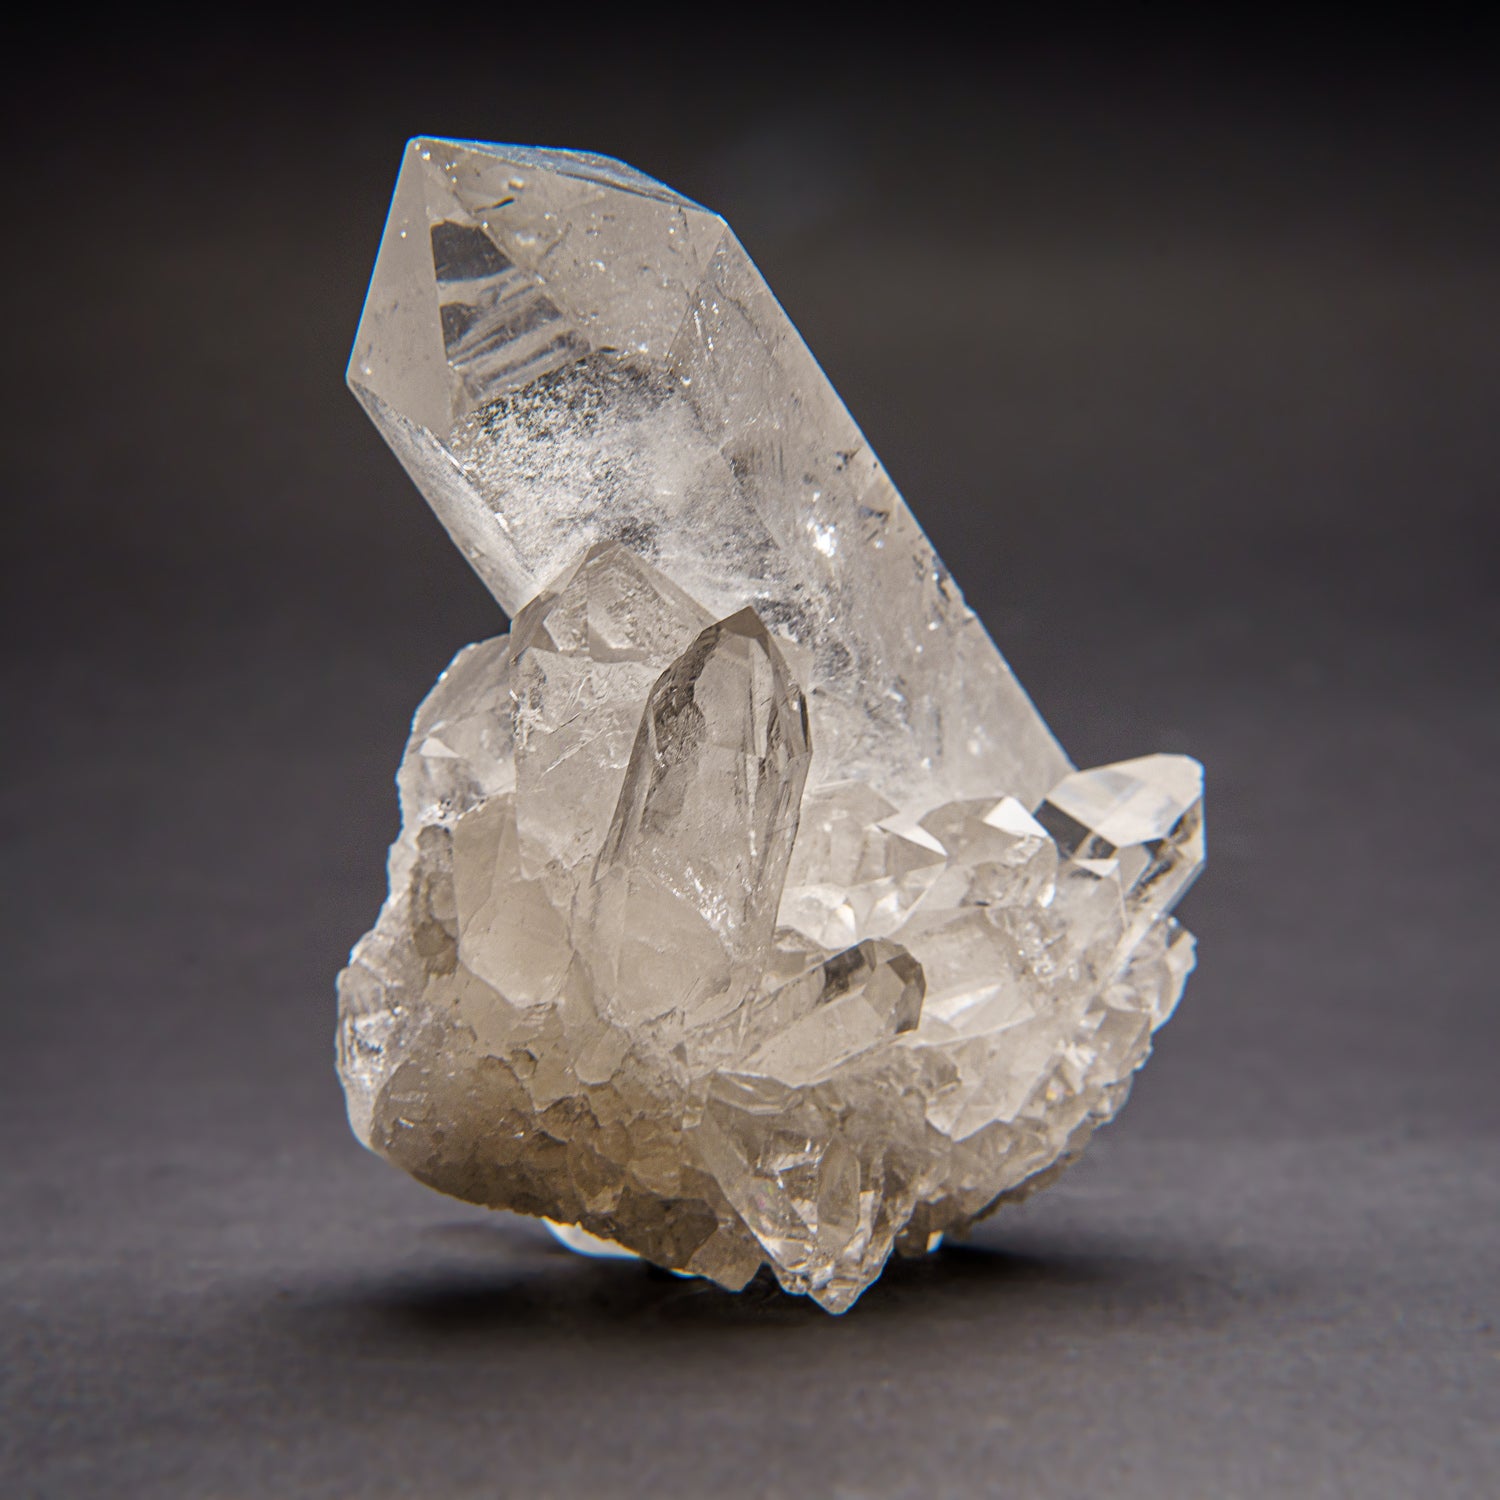 Genuine Clear Quartz Crystal Cluster Point from Brazil (372.7 grams)